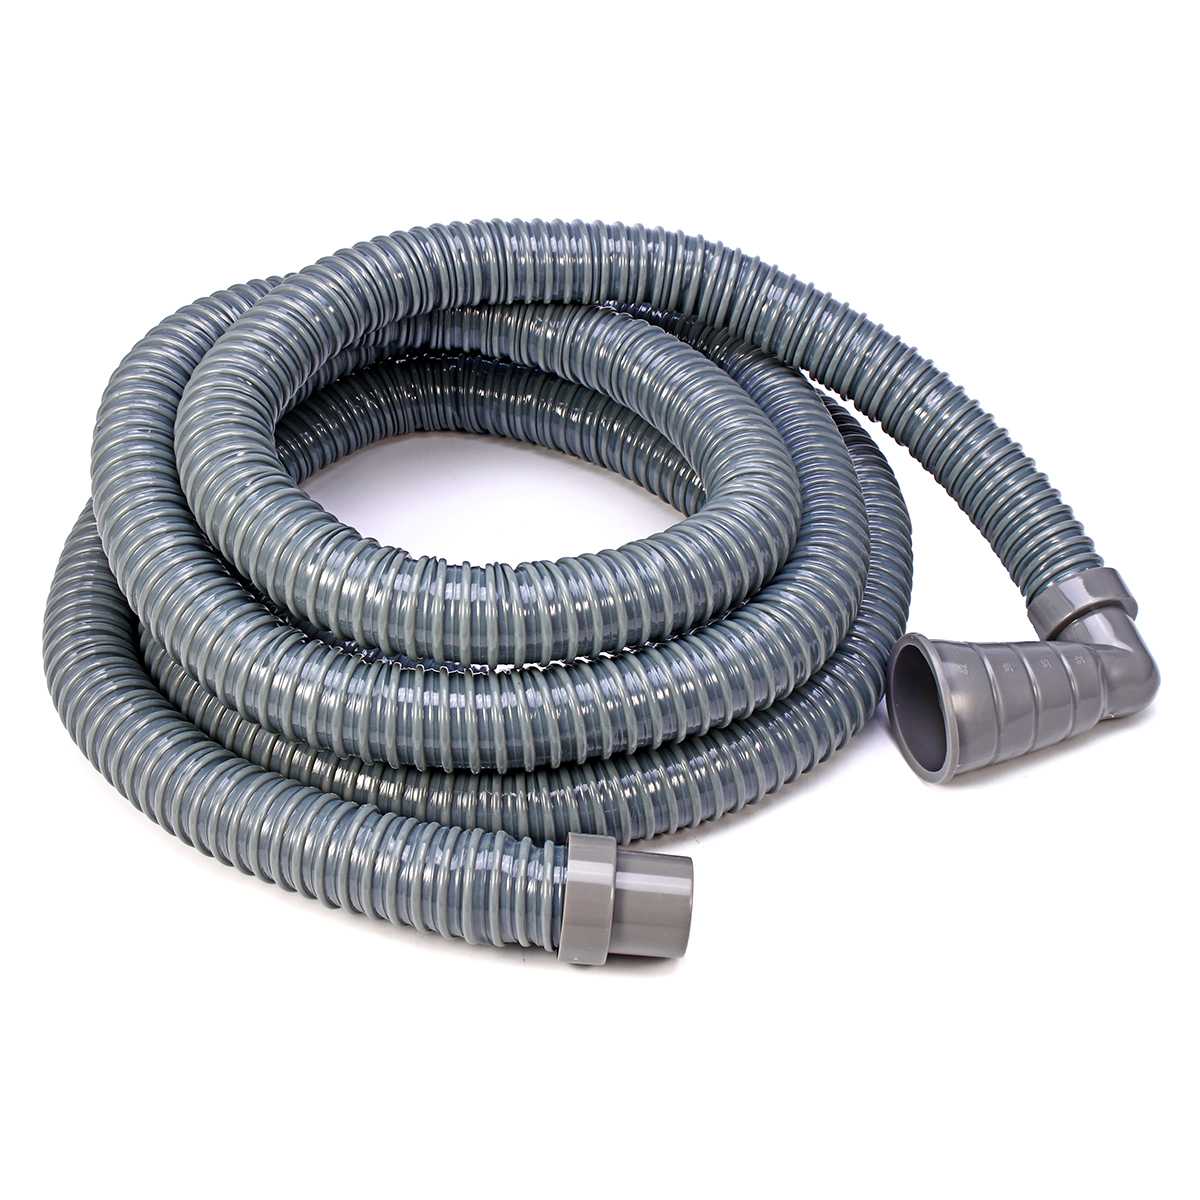 2/3/4/5M Washing Machine Dishwasher Drain Hose Waste Water Outlet Expel Soft Tube Stretchable Drain Flexible Pipe Fits 32-42mm